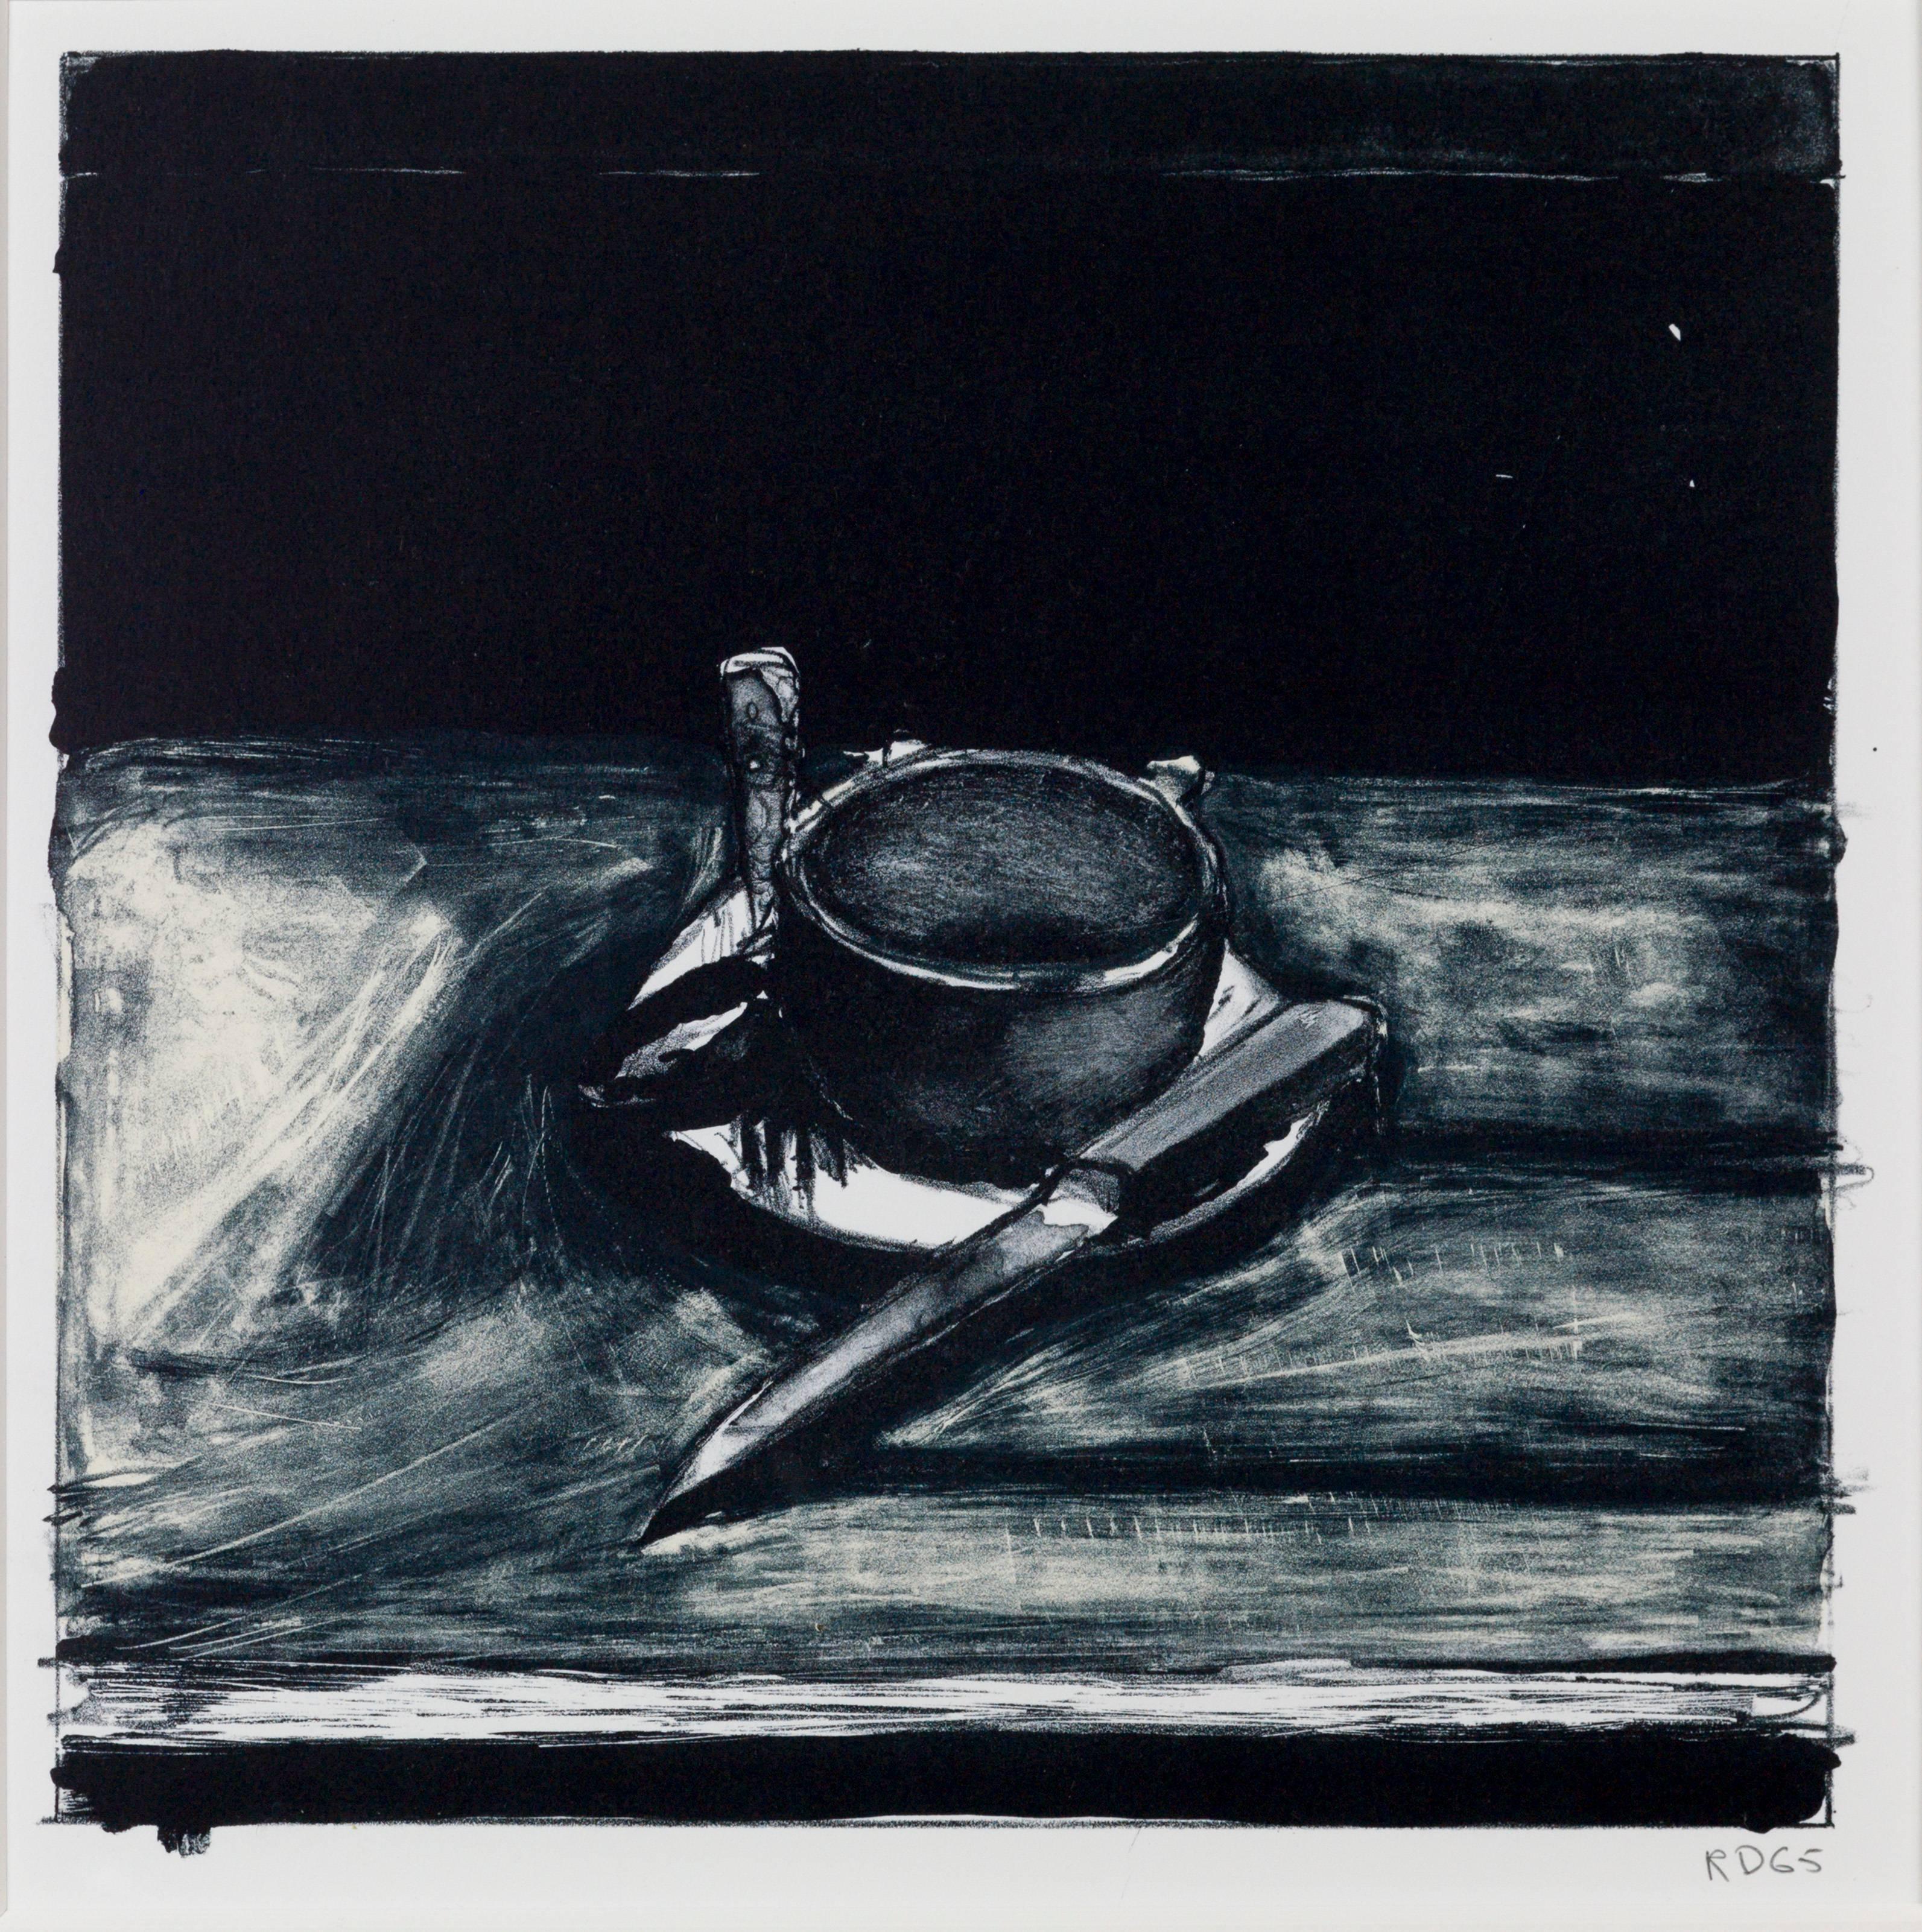 Cup, Saucer, Fork and Knife - Print by Richard Diebenkorn